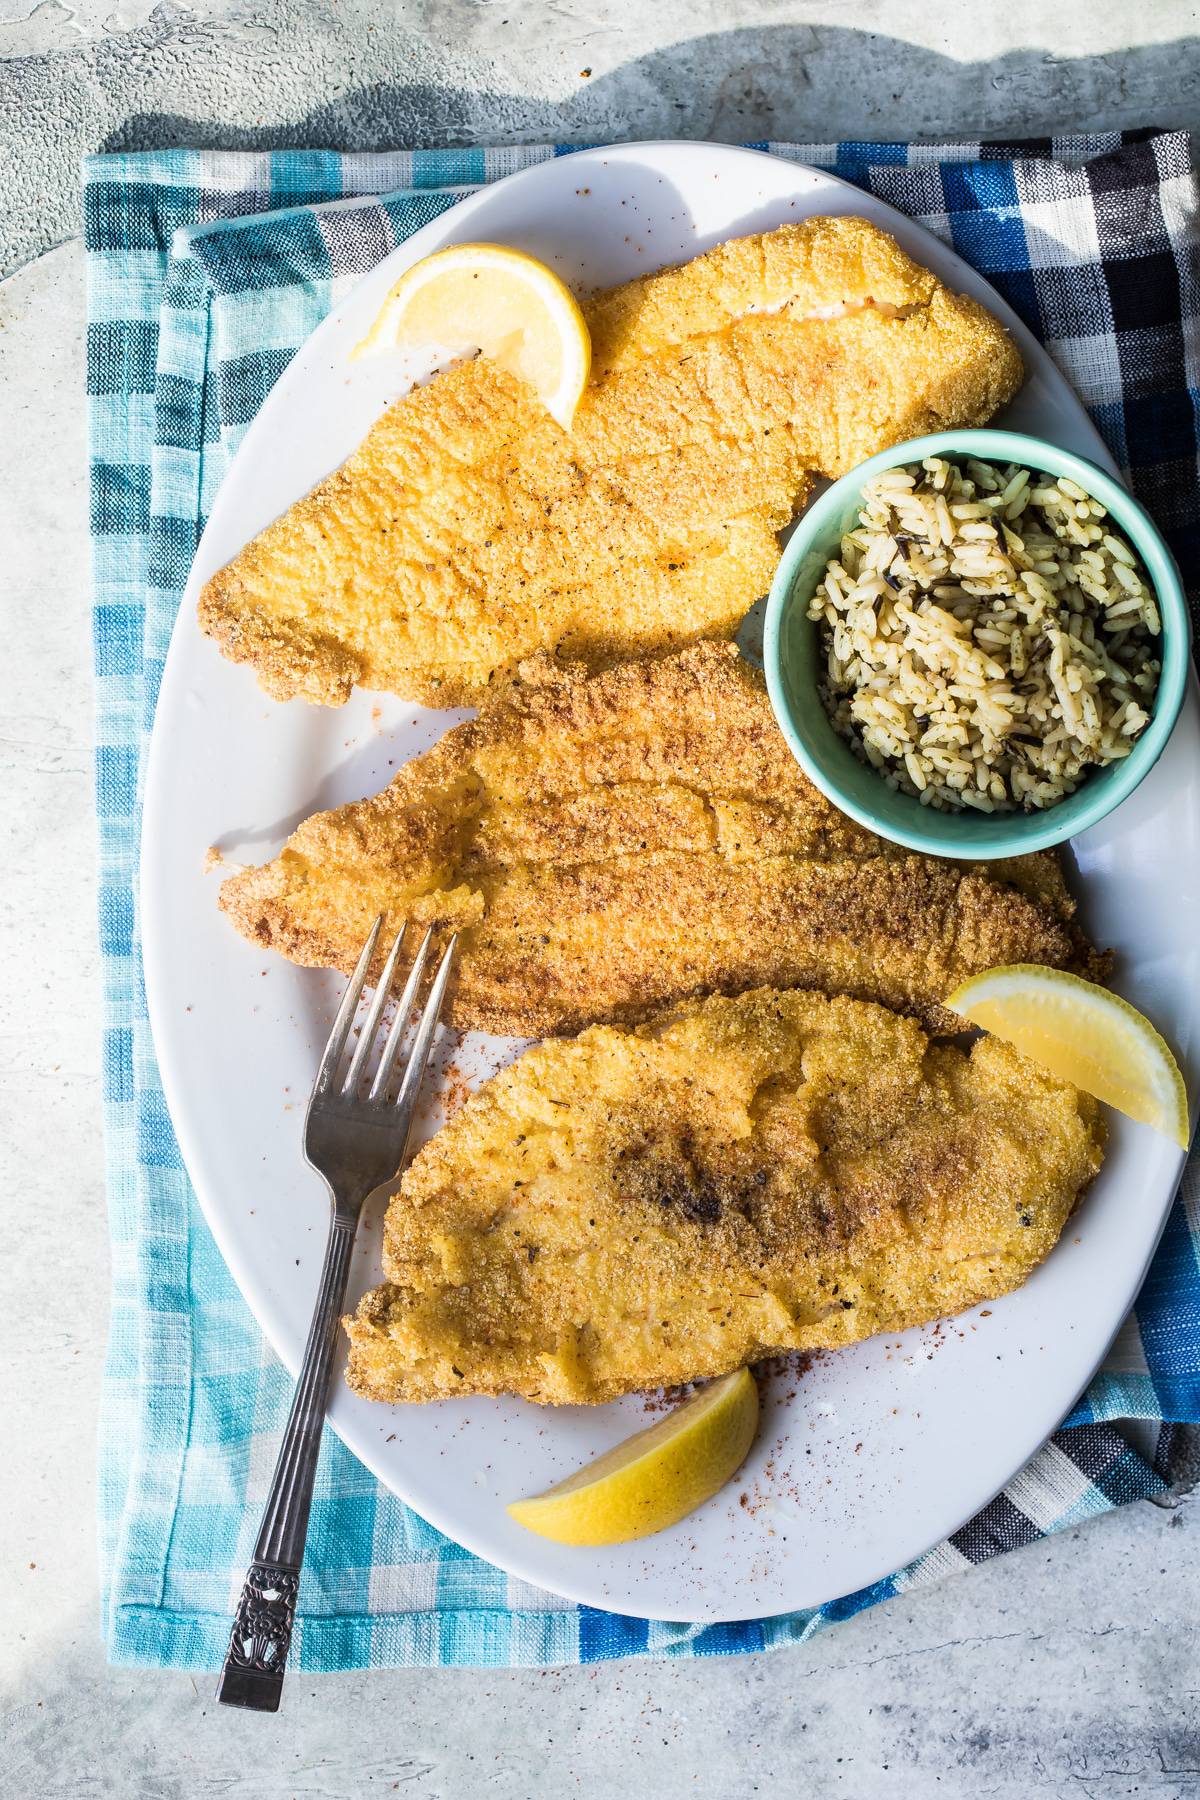 How to Reheat Fried Catfish in Air Fryer